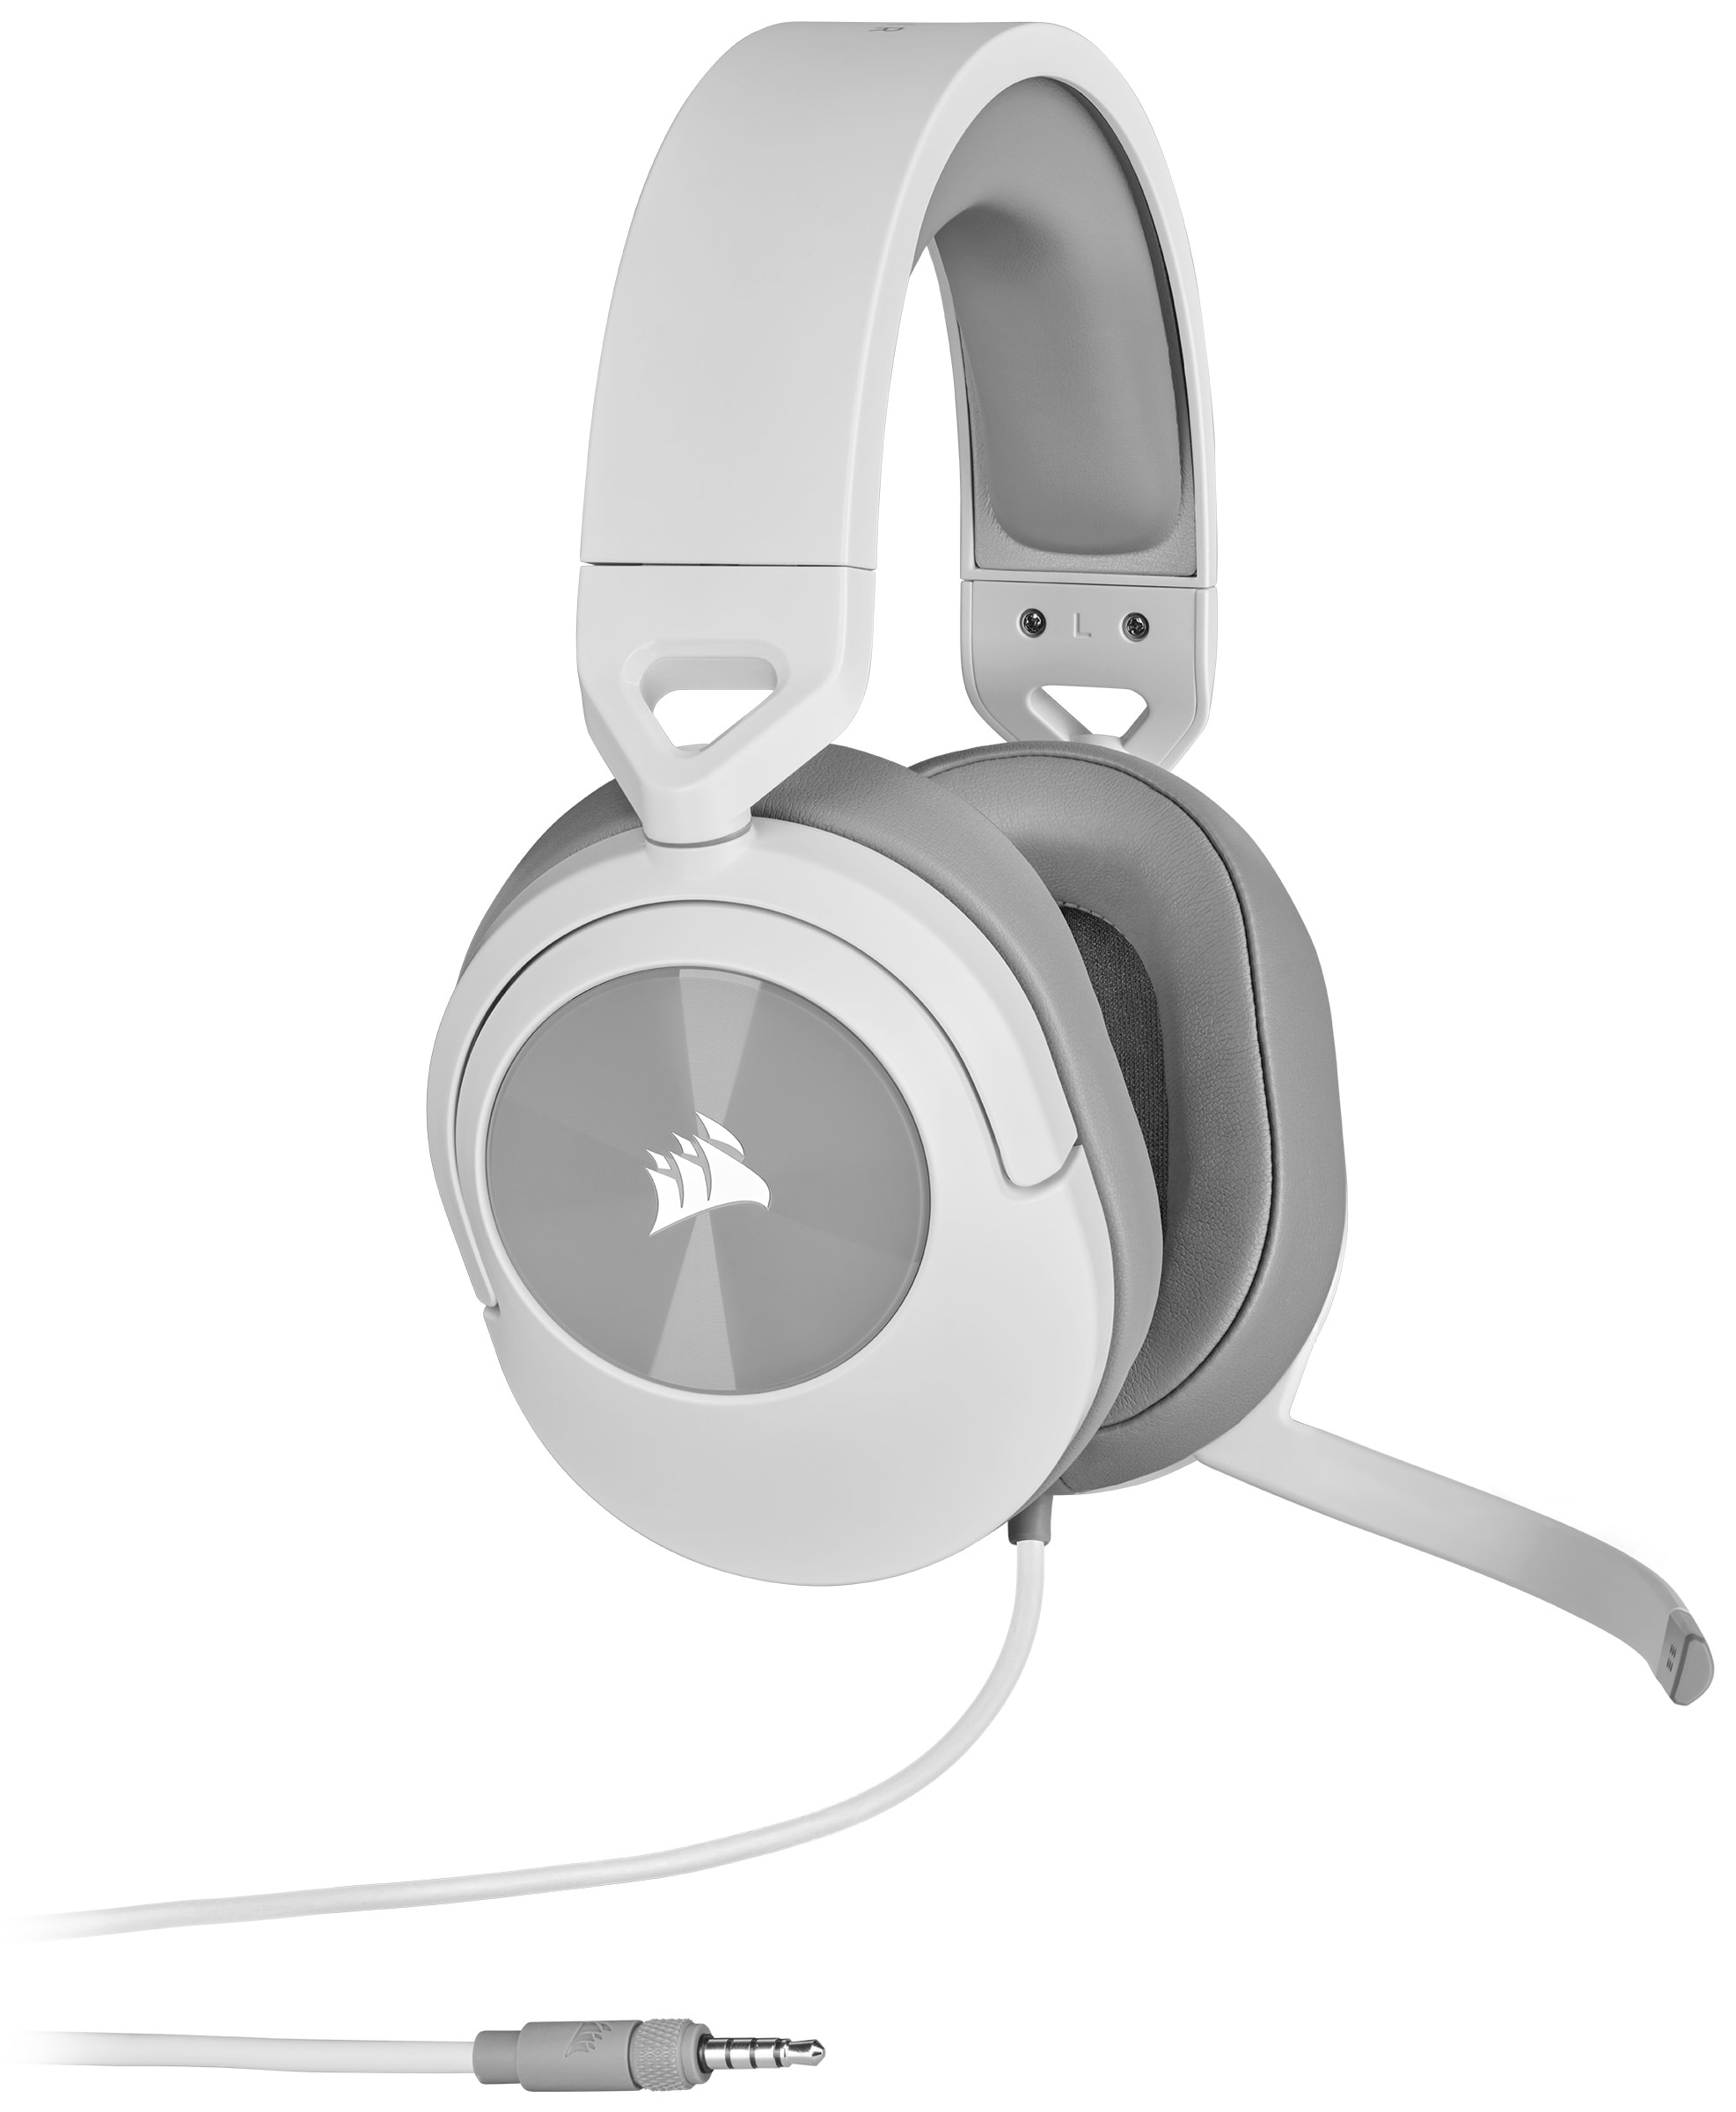 Corsair Gaming-Headset »HS55 Stereo Carbon« kaufen | UNIVERSAL